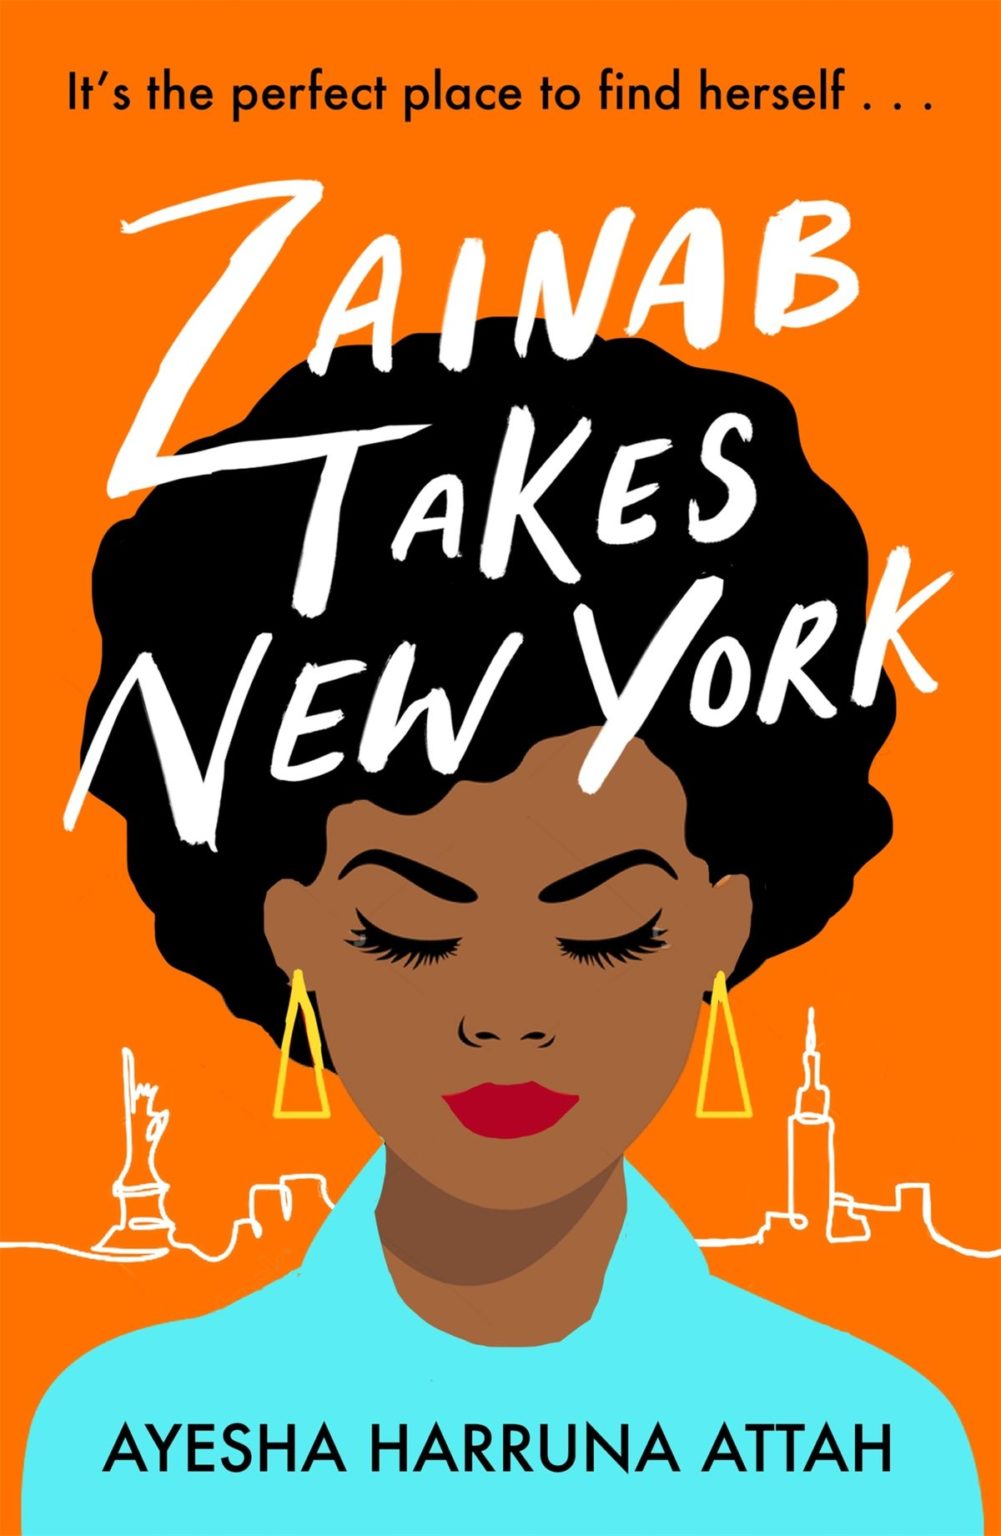 The 20 Best African Book Covers of 2021 (So Far)